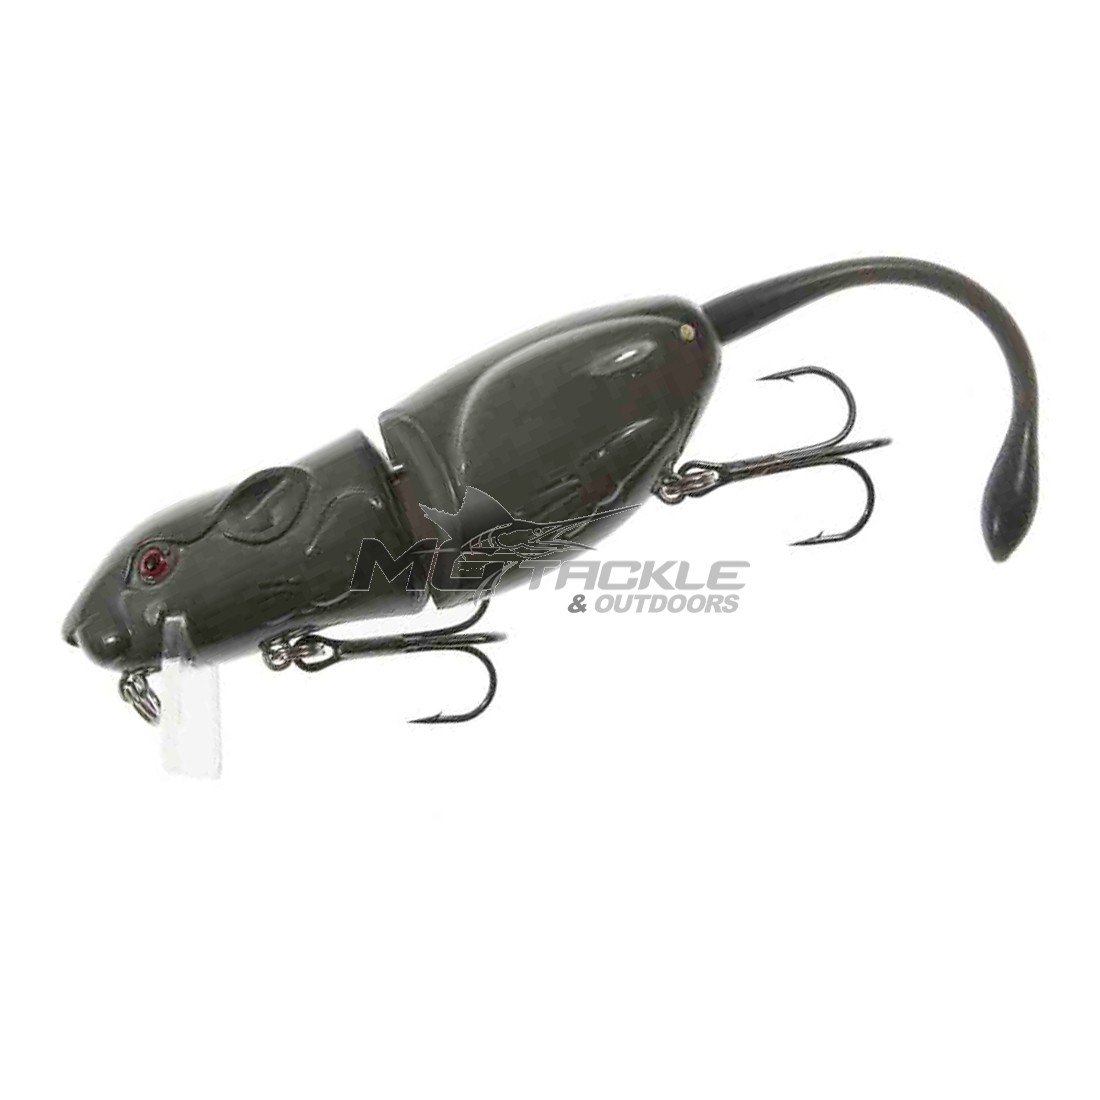 Fast Way Mouse  MoTackle & Outdoors